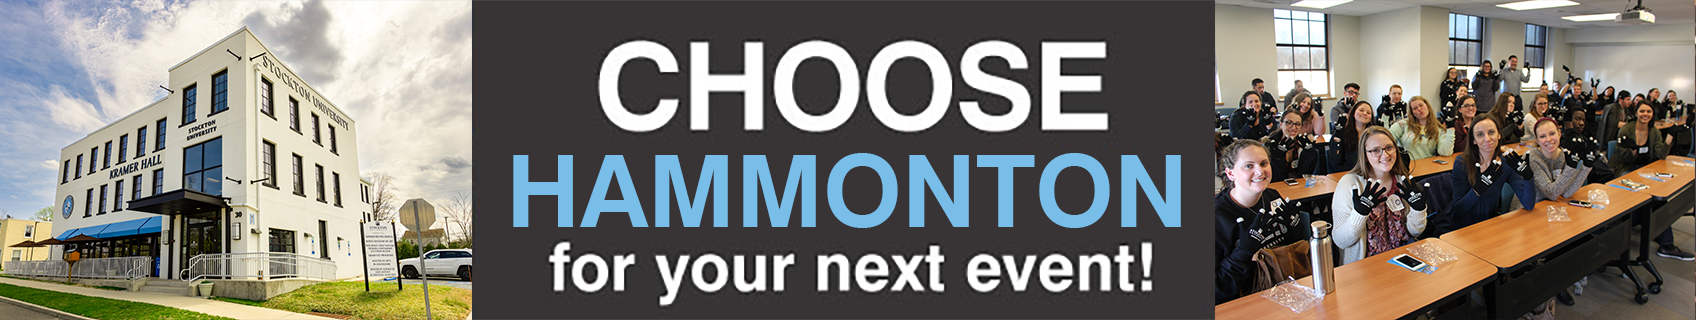 Choose Hammonton for your next event!